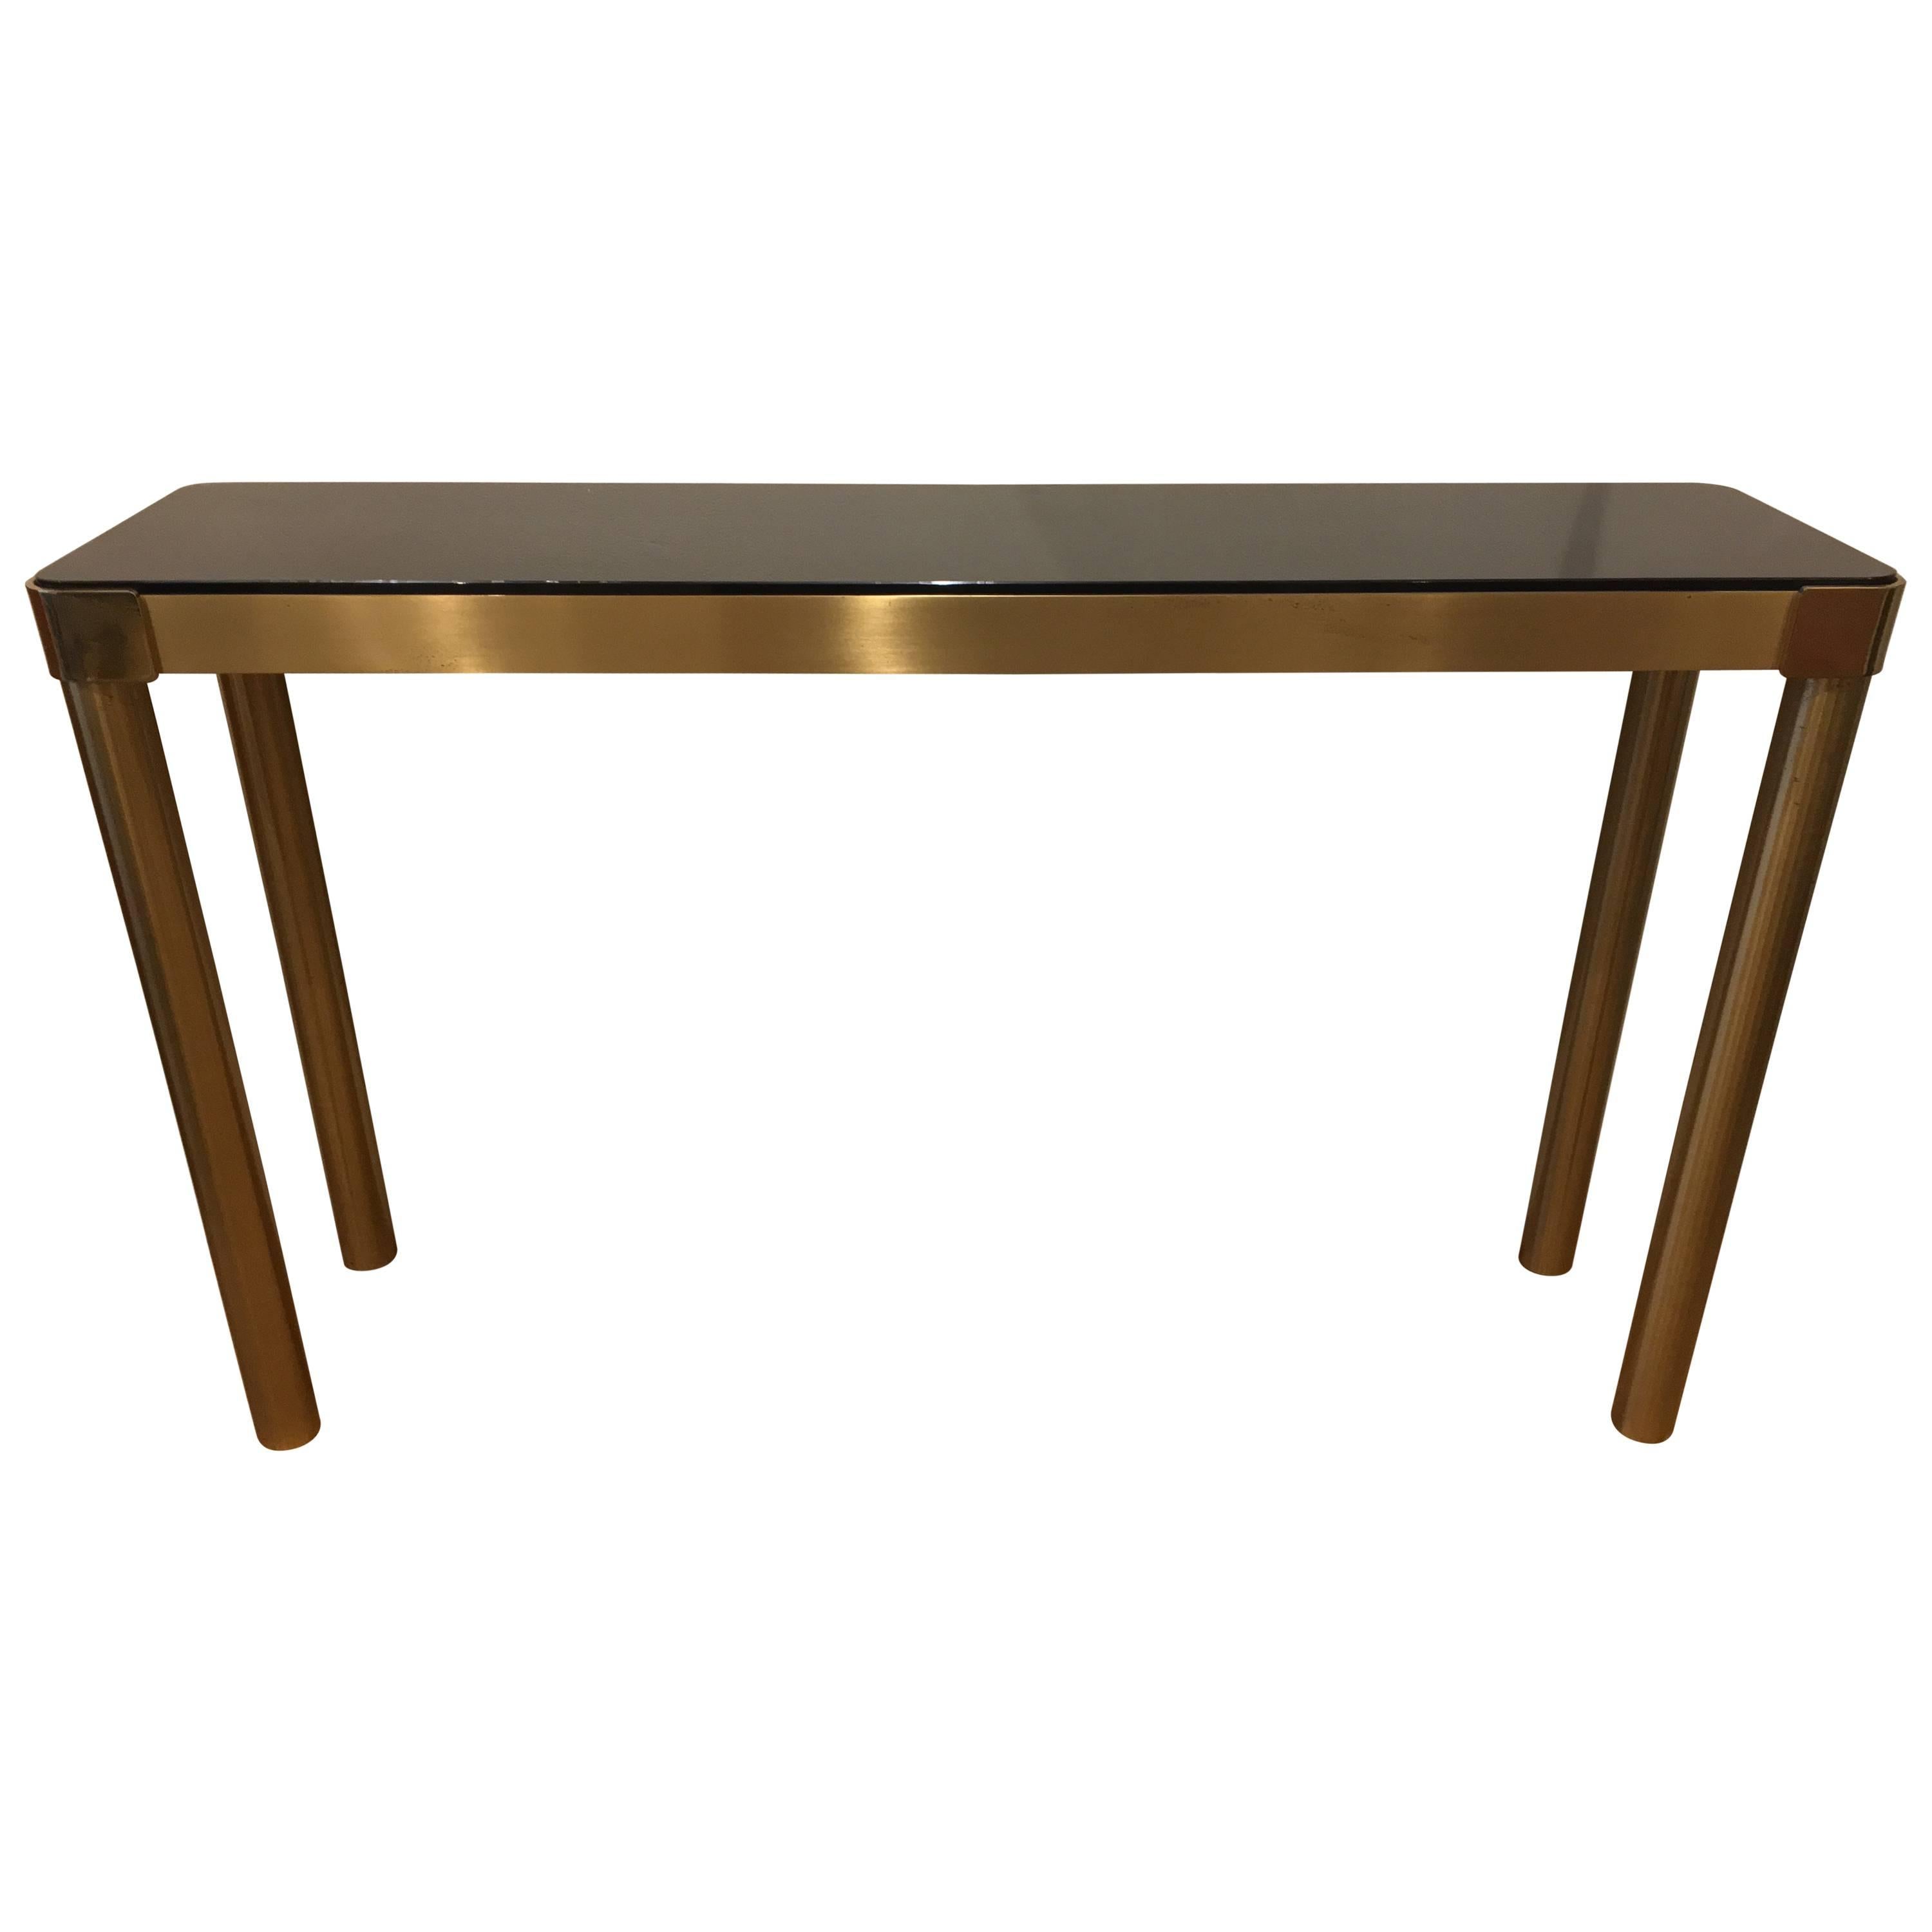 Italian Brass Console with Mirror Top, 1970s For Sale